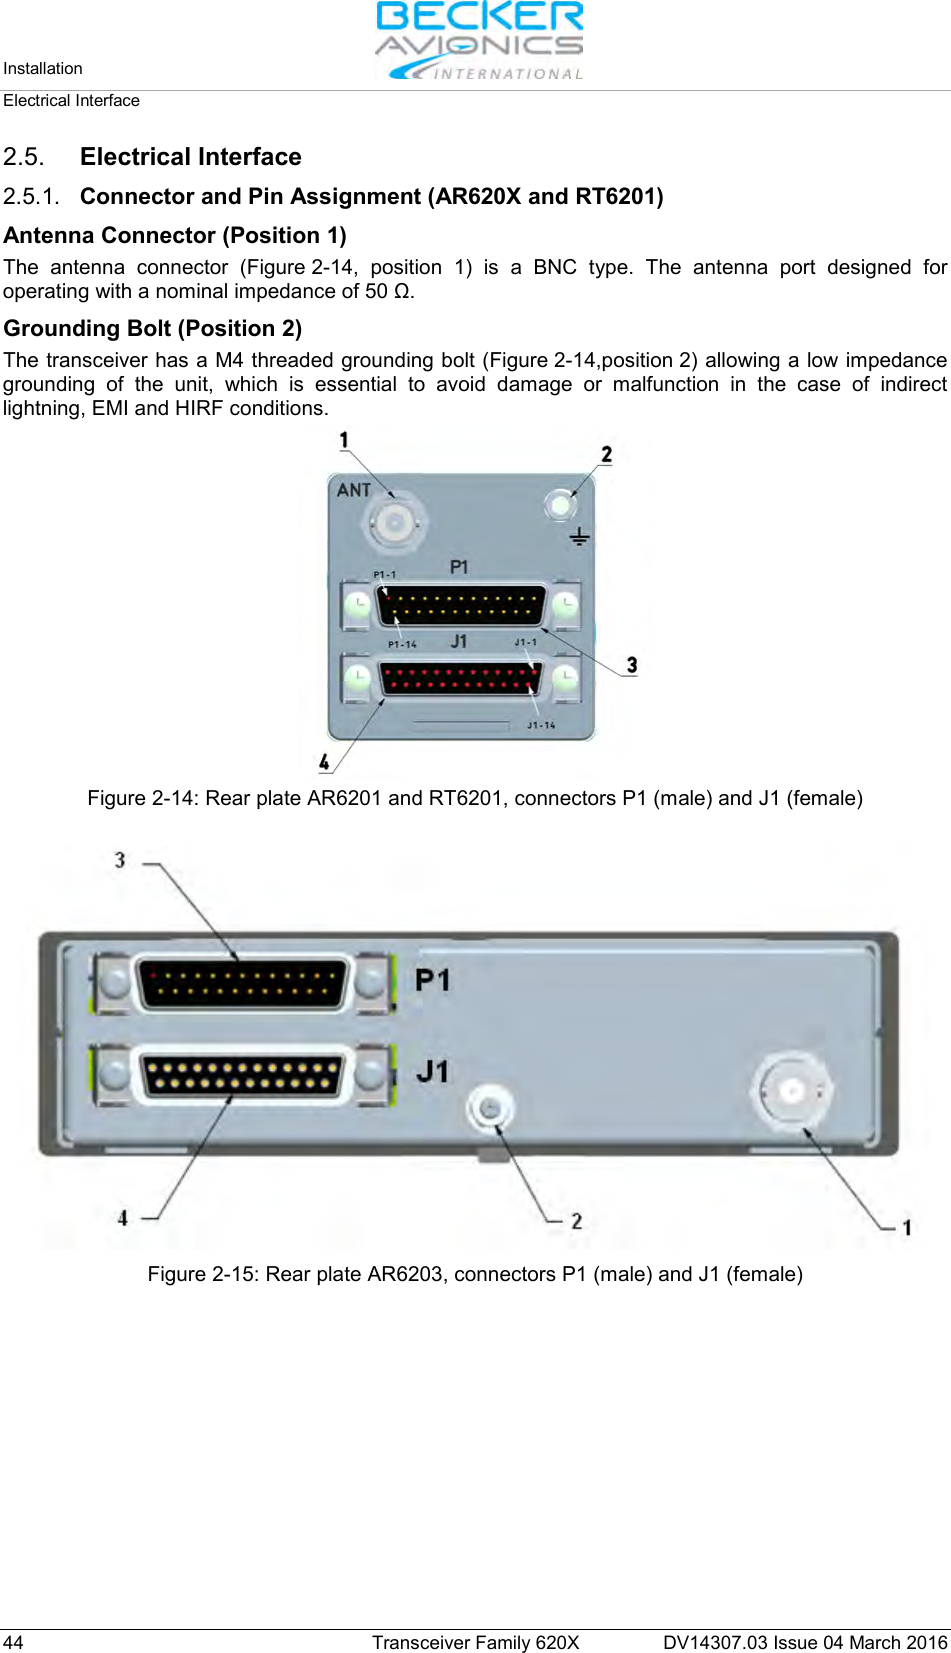 Installation   Electrical Interface  44 Transceiver Family 620X DV14307.03 Issue 04 March 2016 2.5. Electrical Interface 2.5.1. Connector and Pin Assignment (AR620X and RT6201) Antenna Connector (Position 1) The antenna connector (Figure 2-14, position 1) is a BNC type. The antenna port designed for operating with a nominal impedance of 50 Ω. Grounding Bolt (Position 2) The transceiver has a M4 threaded grounding bolt (Figure 2-14,position 2) allowing a low impedance grounding of the unit, which is essential to avoid damage or malfunction in the case of indirect lightning, EMI and HIRF conditions.  Figure 2-14: Rear plate AR6201 and RT6201, connectors P1 (male) and J1 (female)   Figure 2-15: Rear plate AR6203, connectors P1 (male) and J1 (female)   